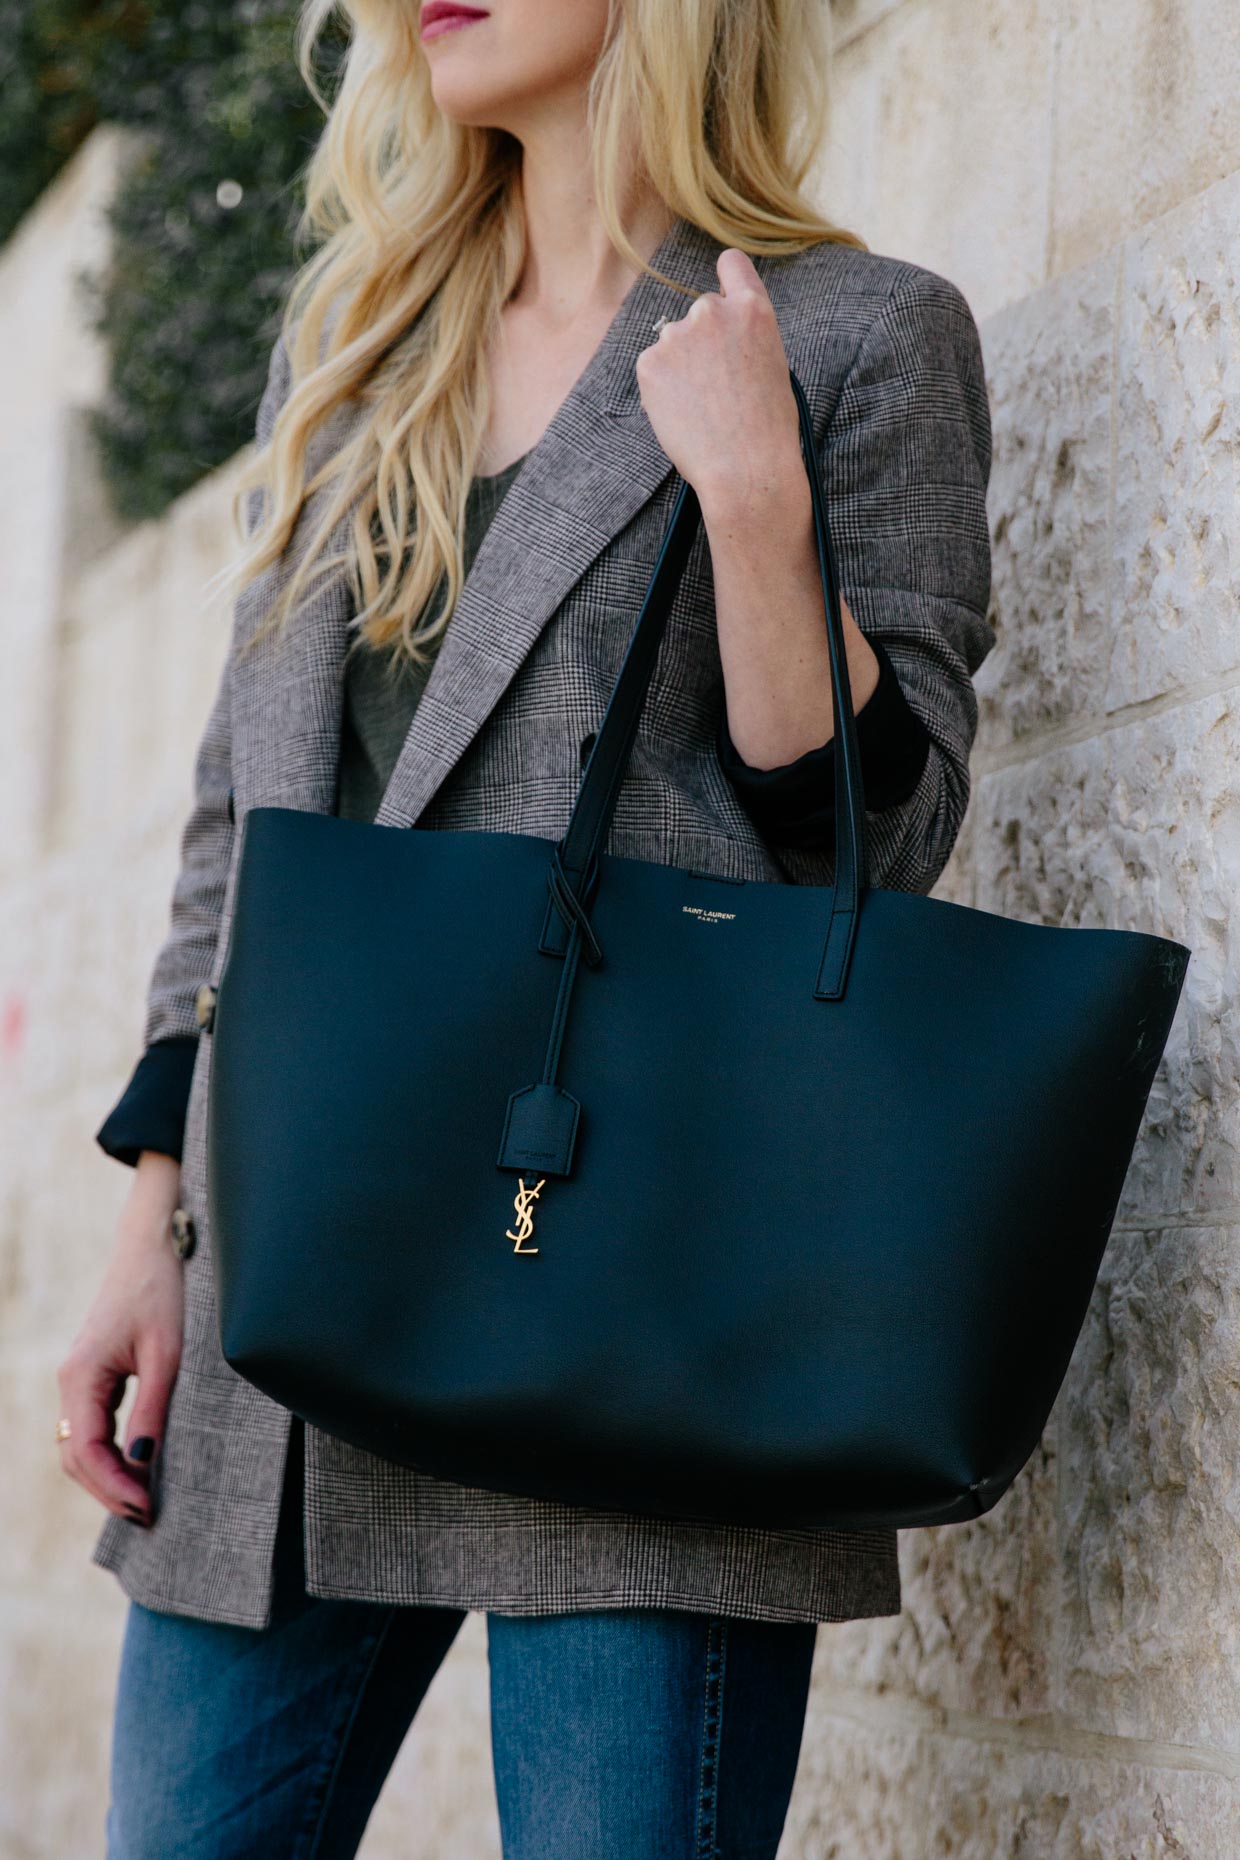 ysl tote outfit